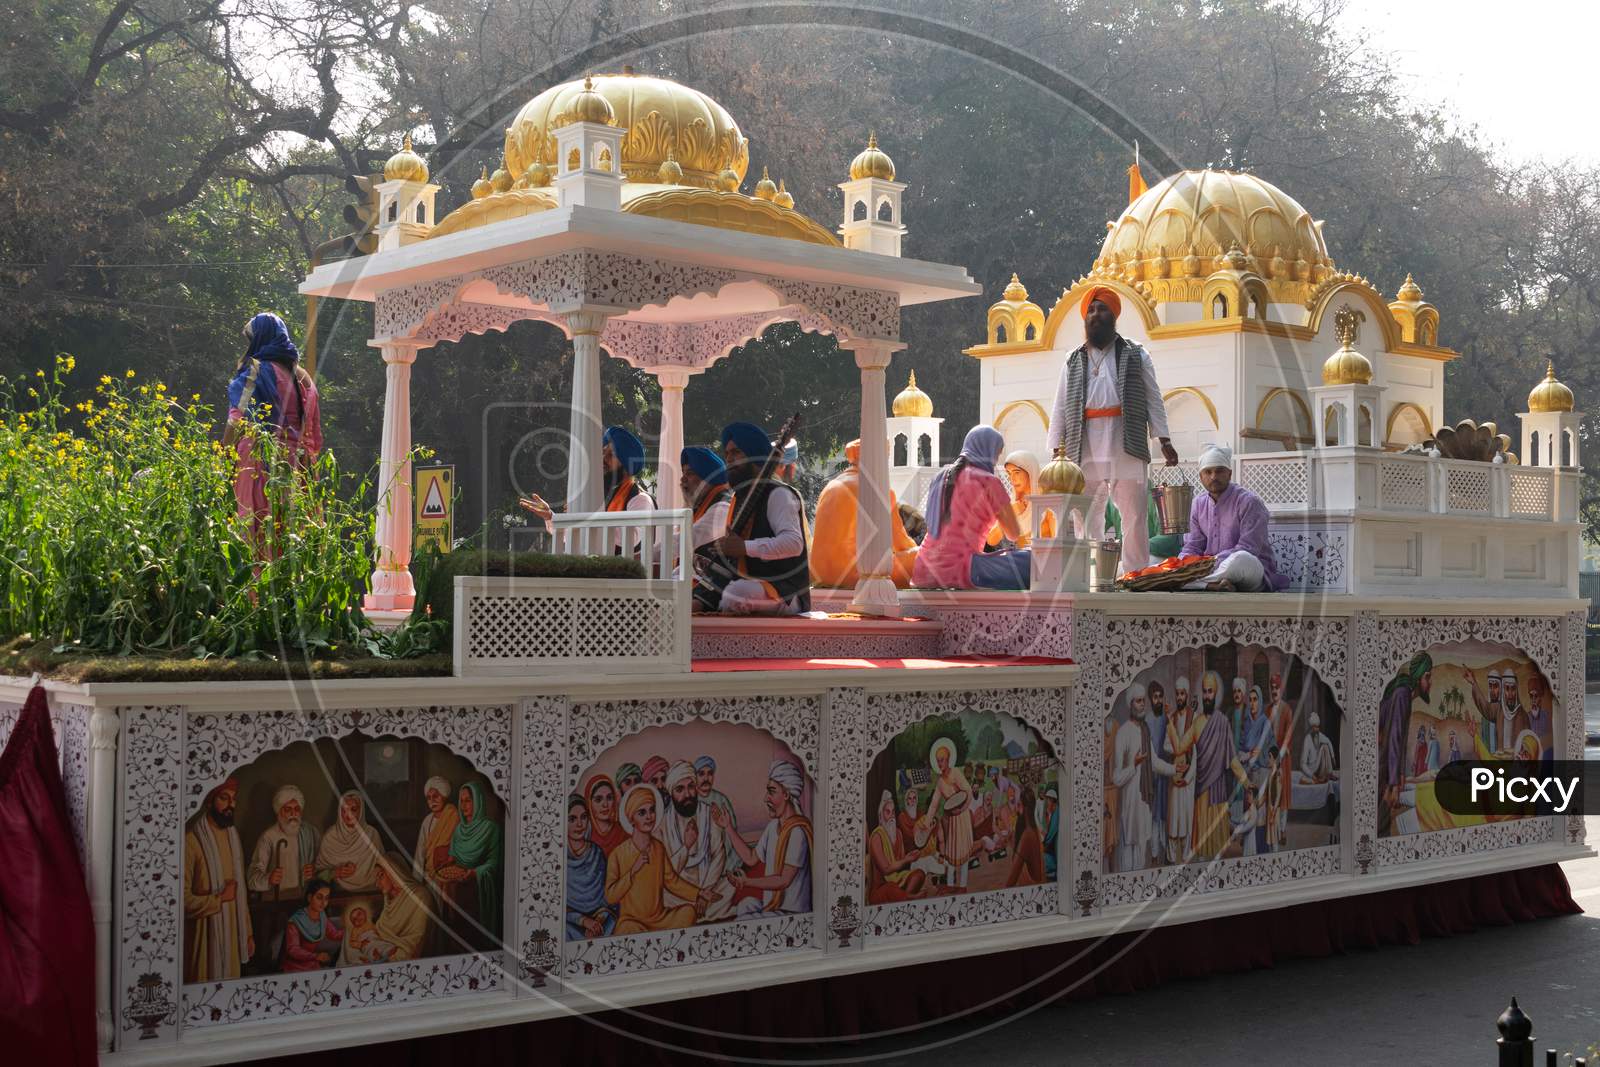 Tableau Of Punjab Shows Culture Of the state On 71st Republic Day 2020